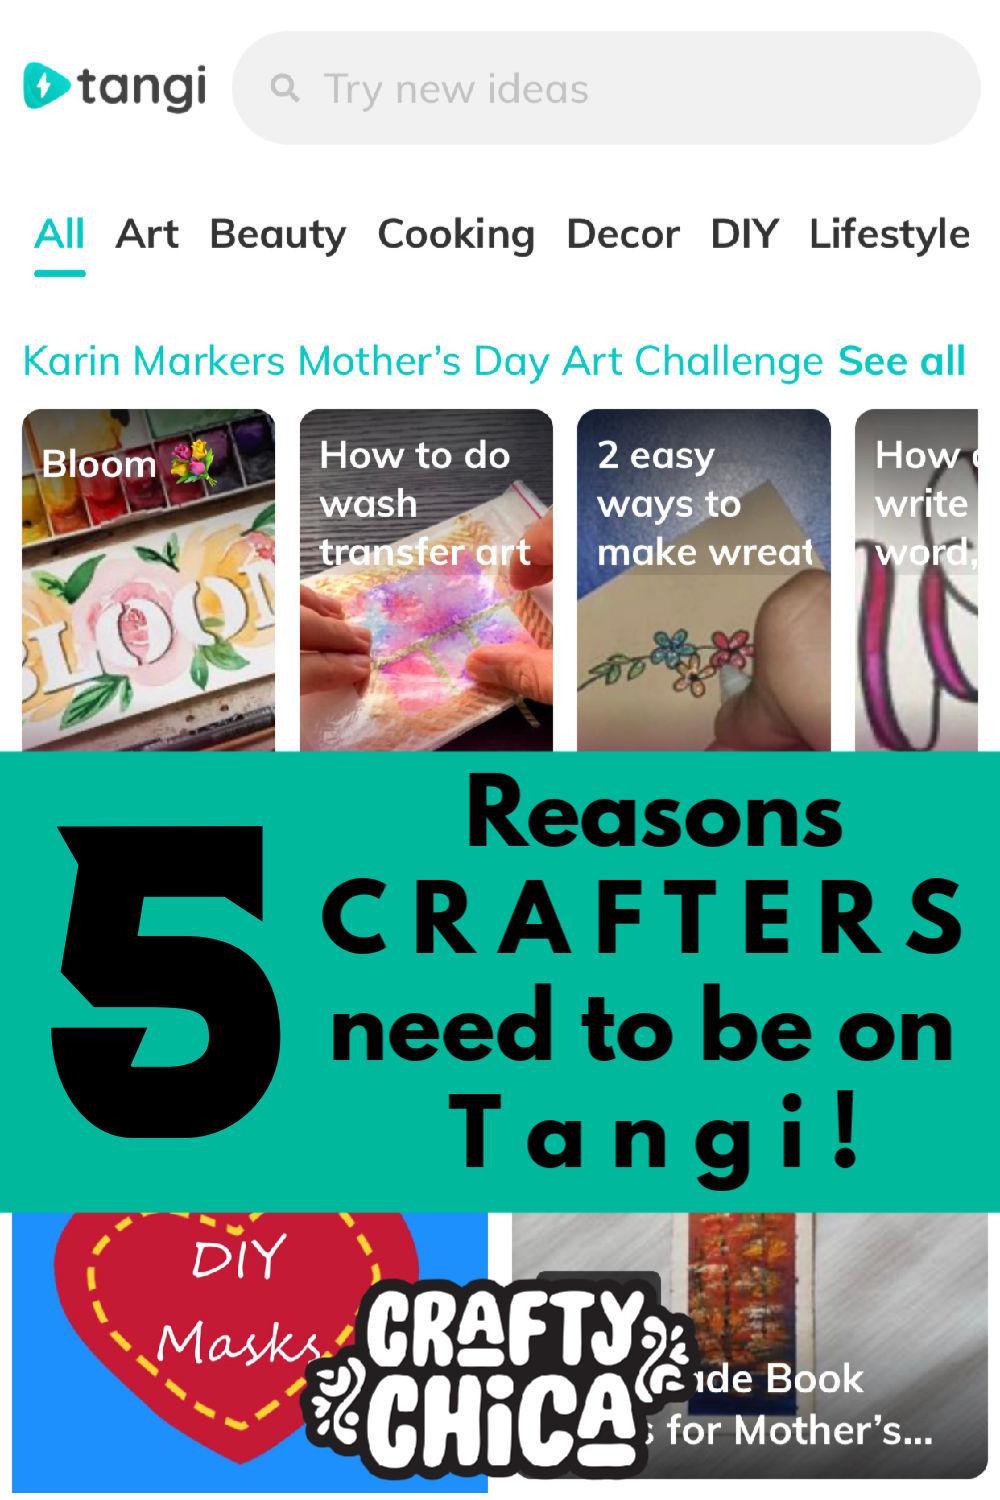 Tangi app: 5 reasons crafters should use it!